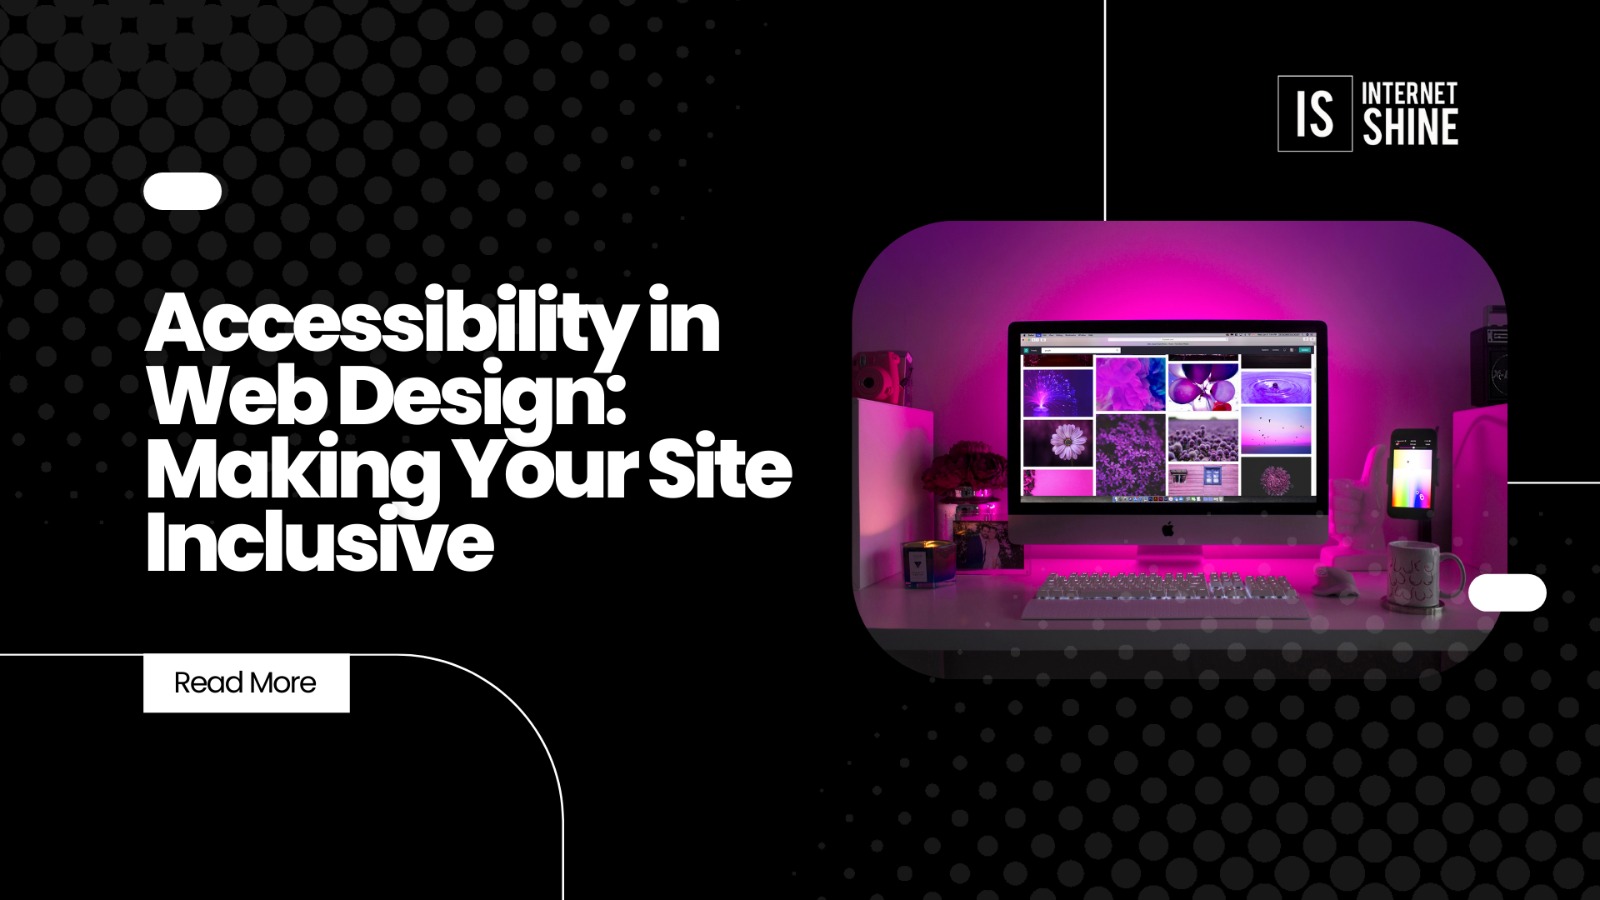 Accessibility in Web Design: Making Your Site Inclusive